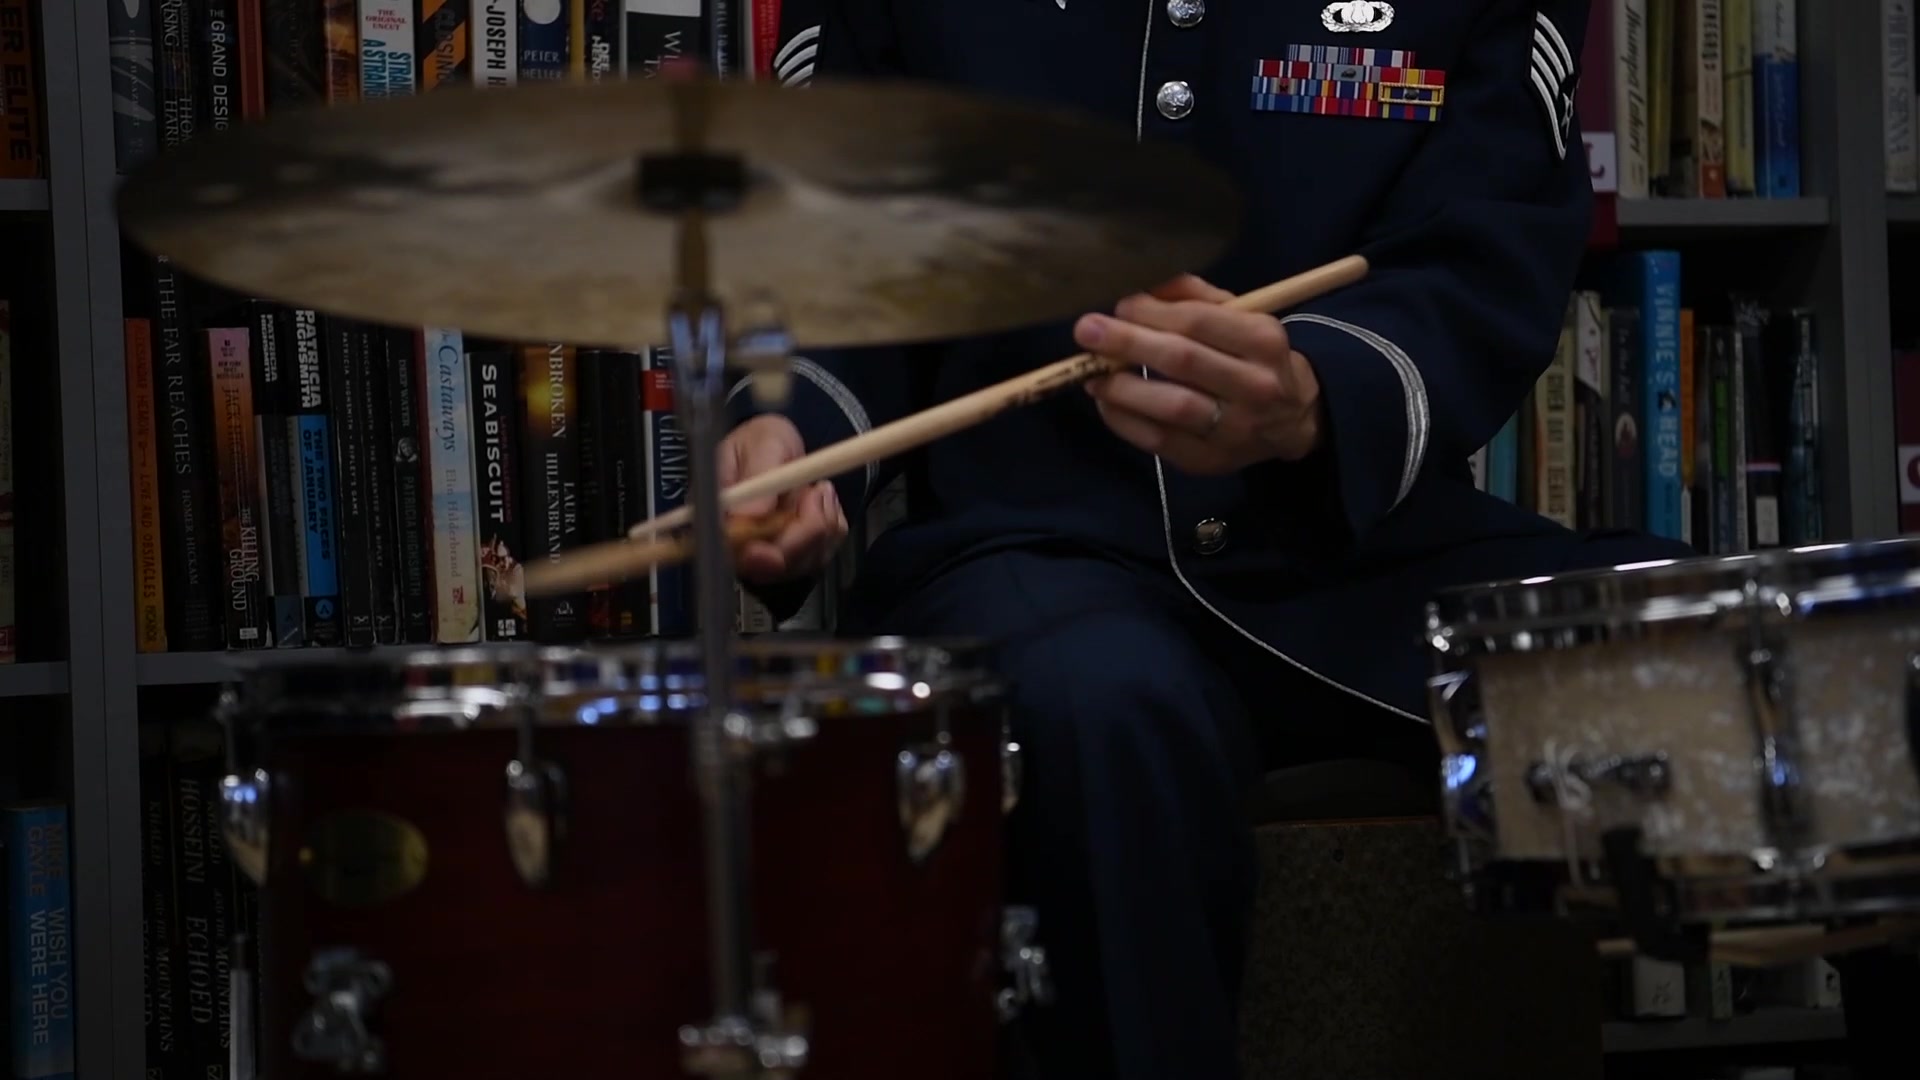 USAF Band meets with locals